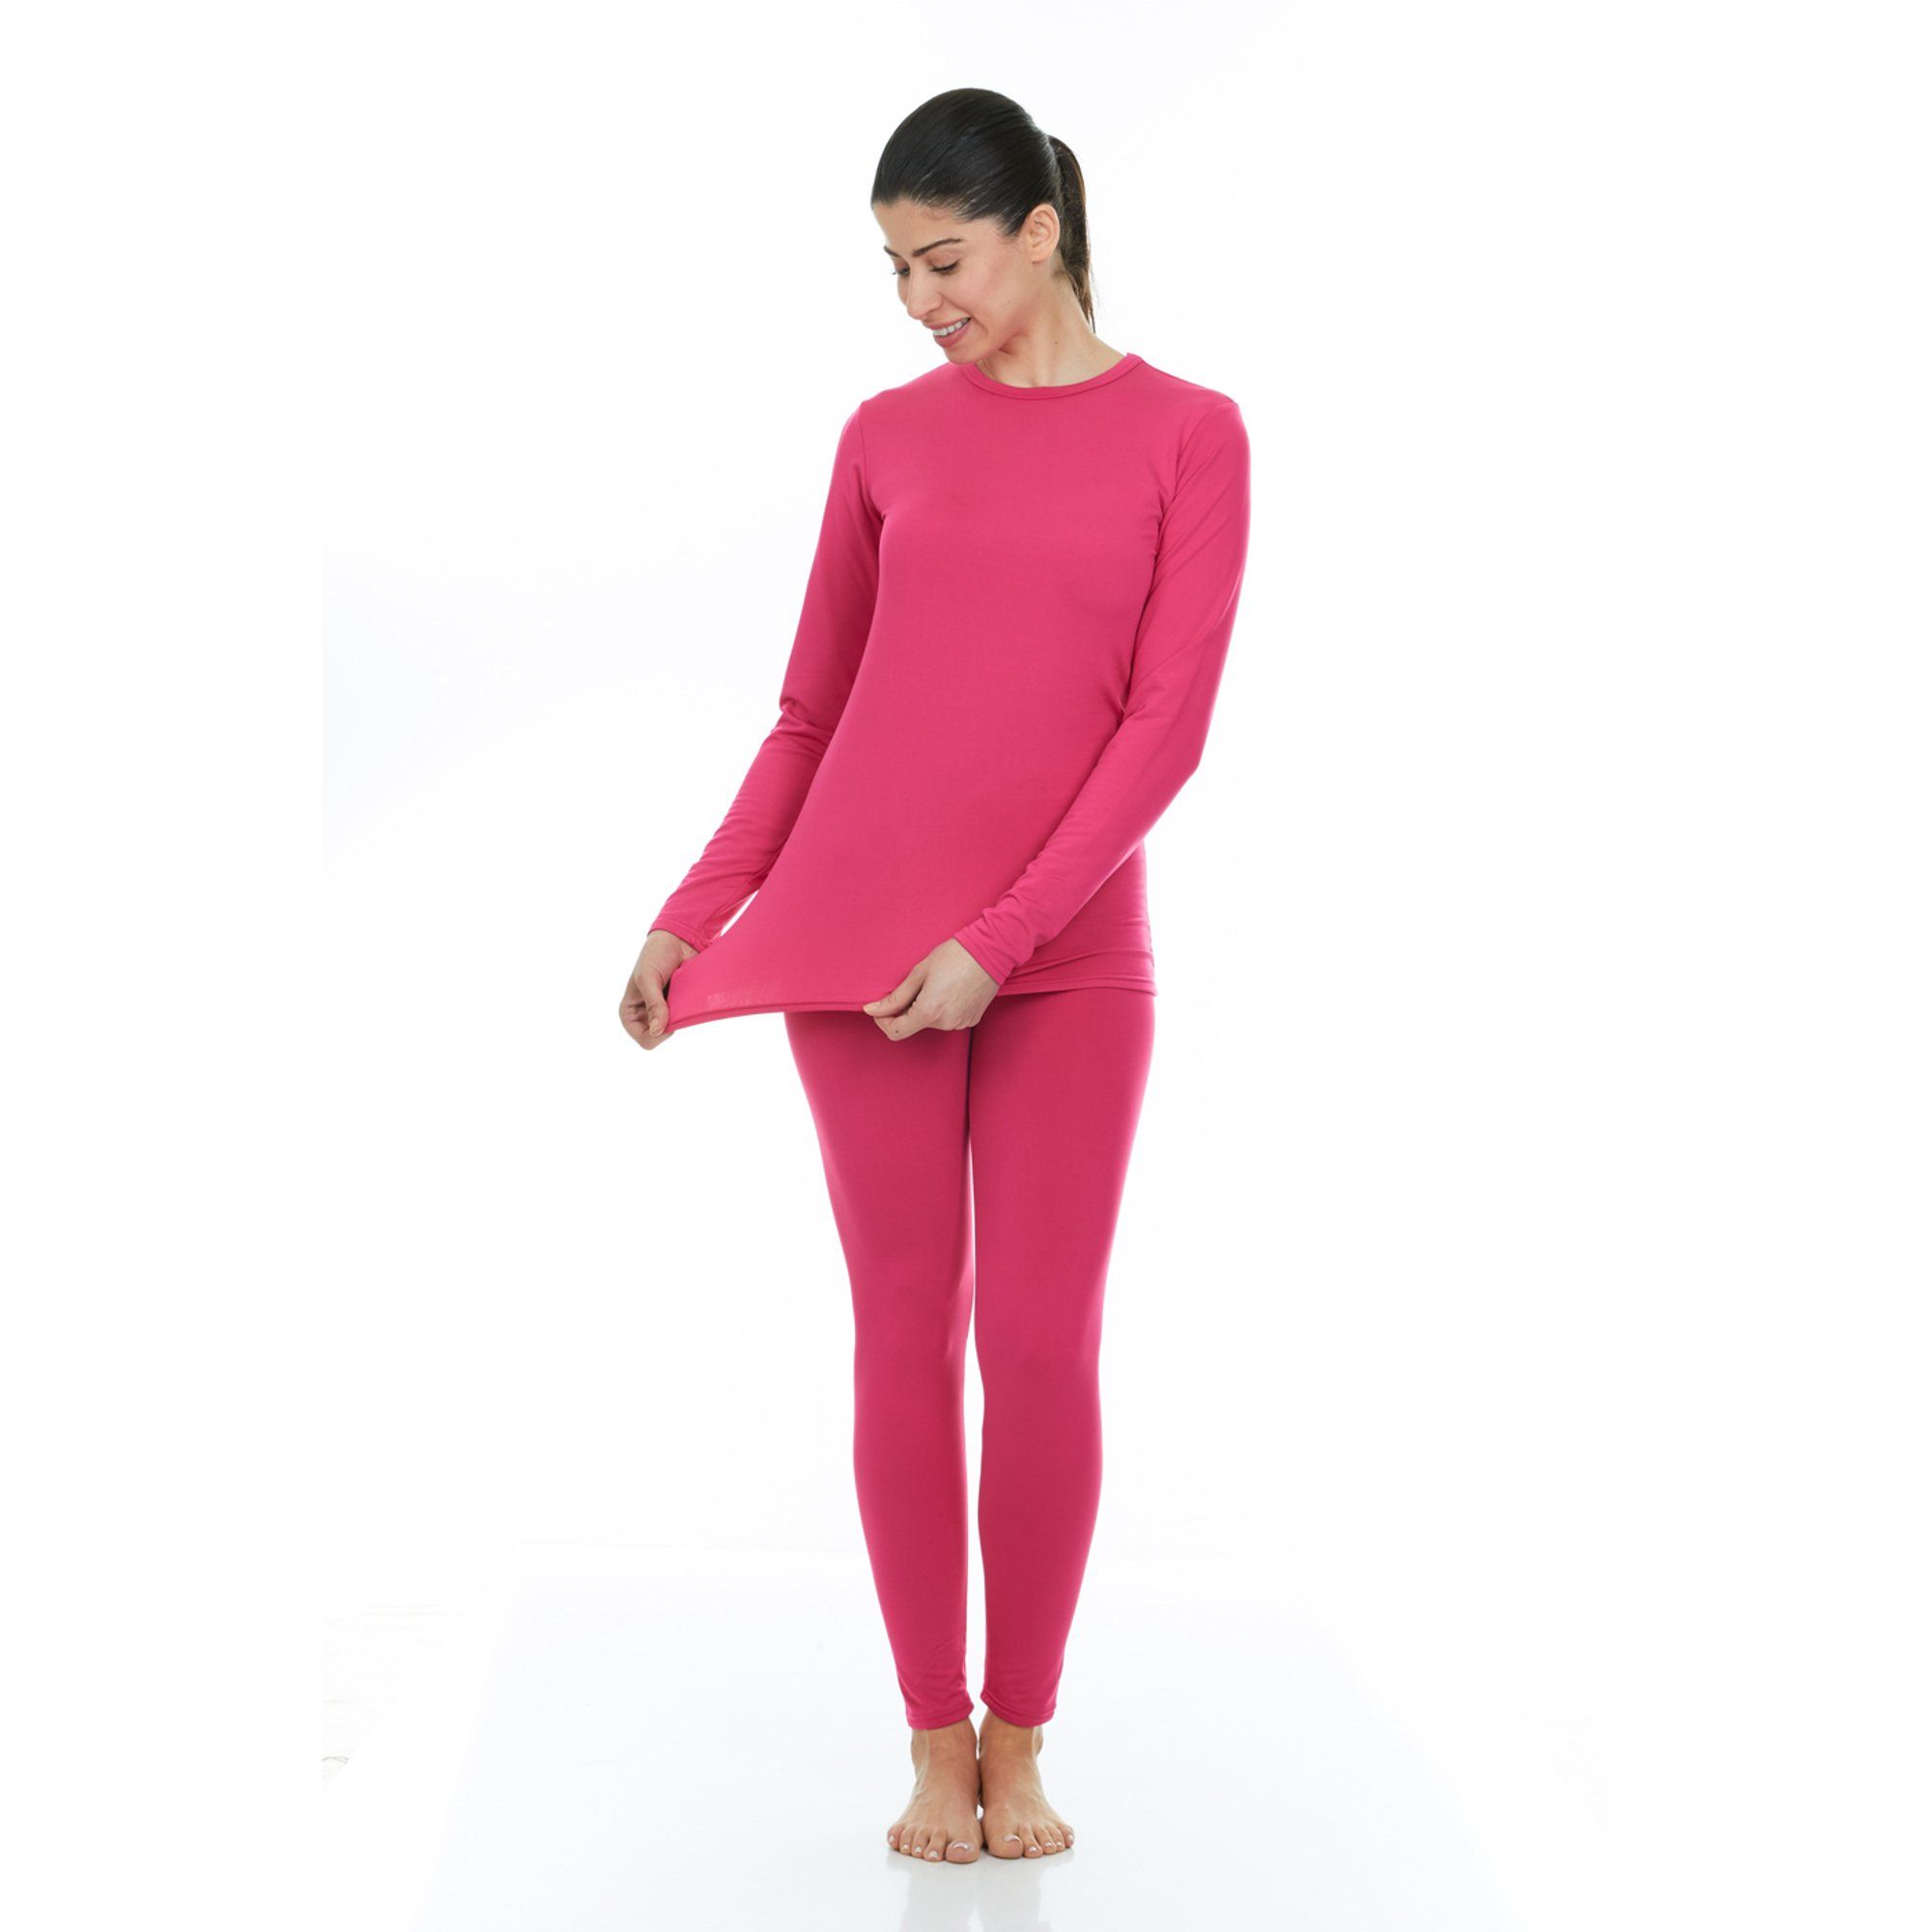 Thermajane Women's Ultra Soft Thermal Underwear Long Johns Set With Fleece Lined (Small, Pink) | Walmart (US)